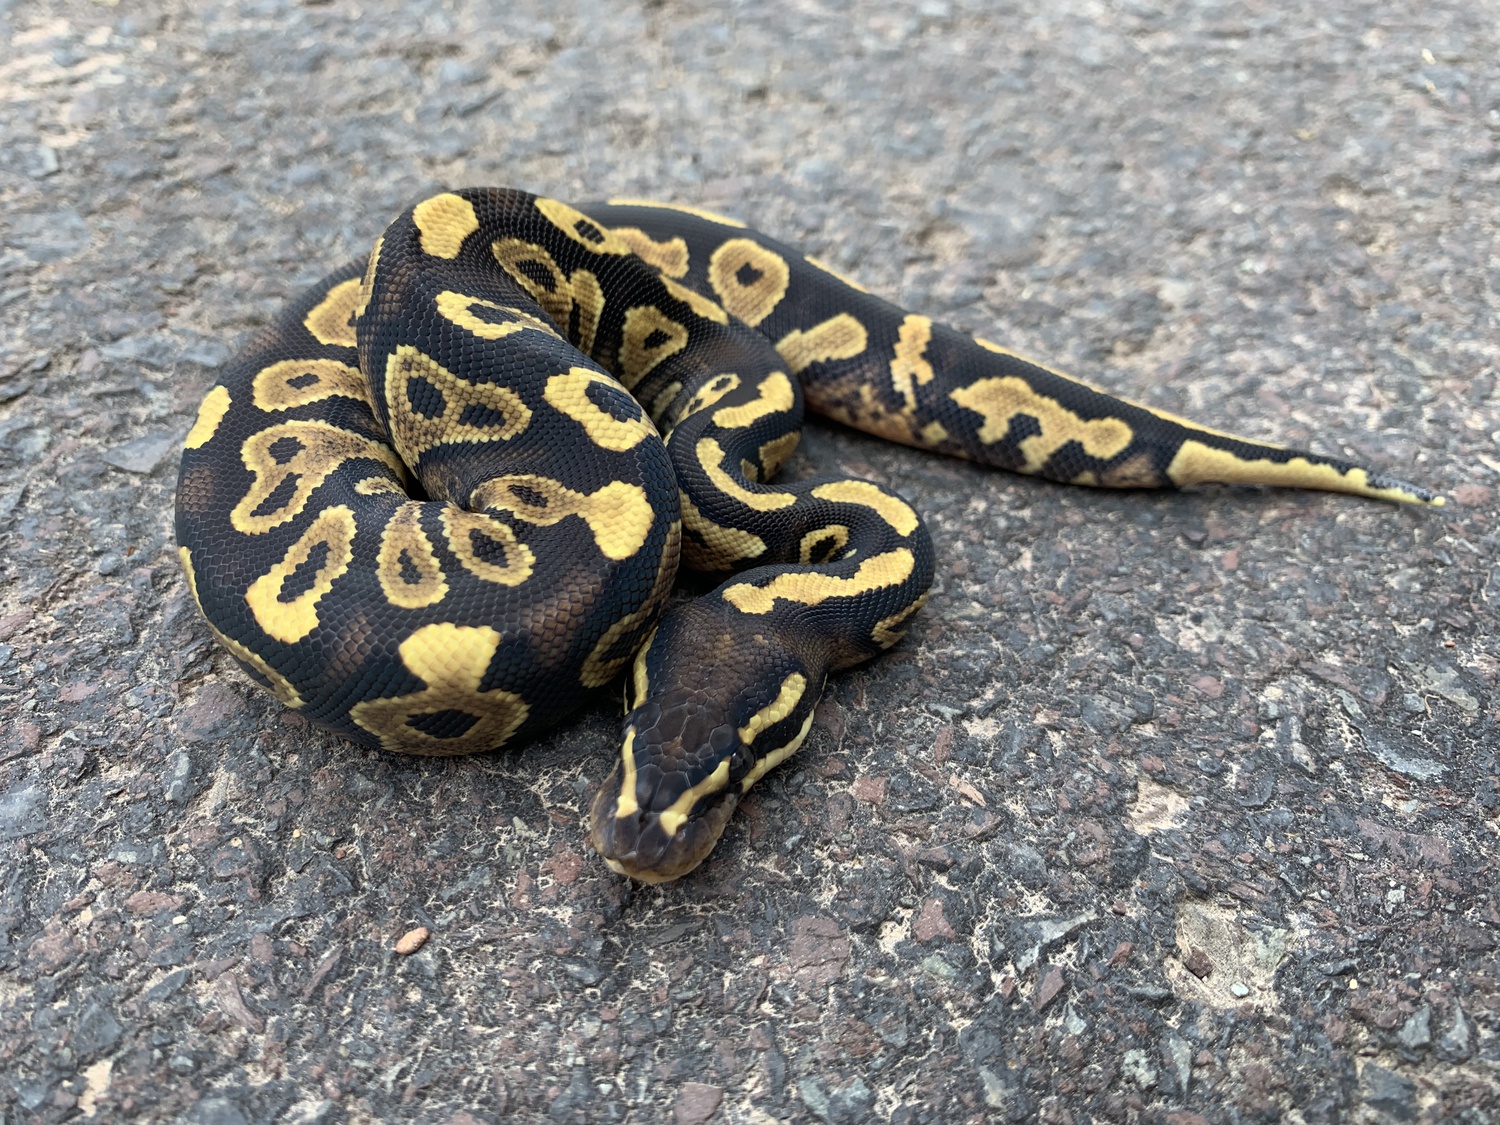 Astro Yellowbelly Ball Python by The Seventh Serpent